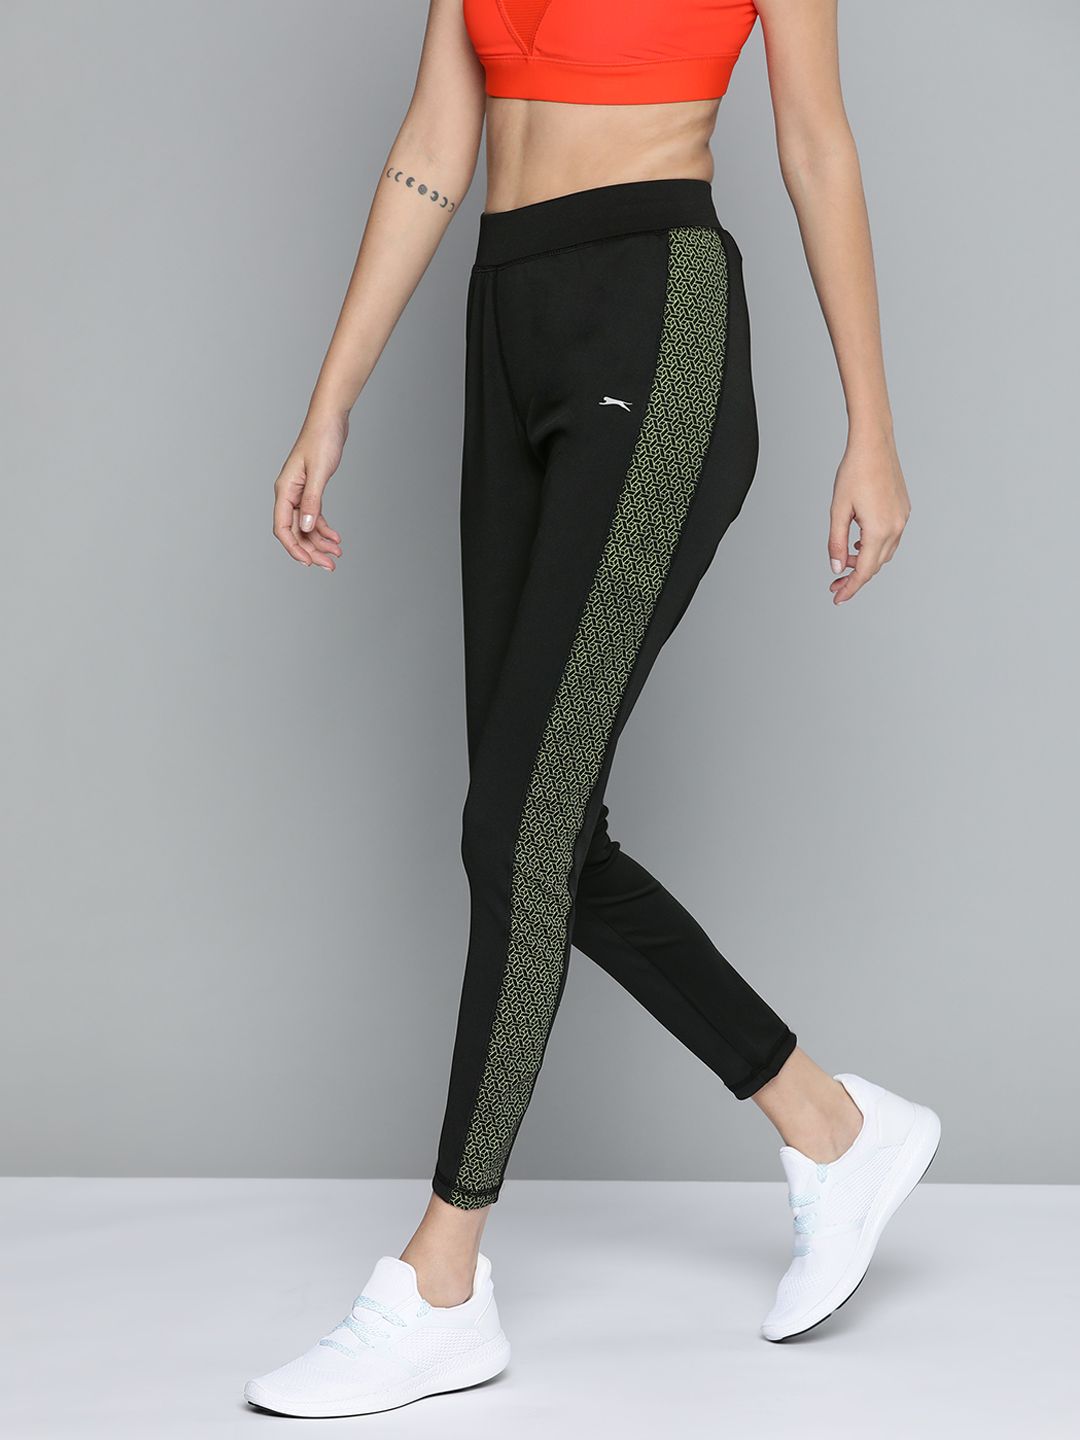 Slazenger Women Black & Green  Reflective Details Running Rapid-Dry Sports Tights Price in India